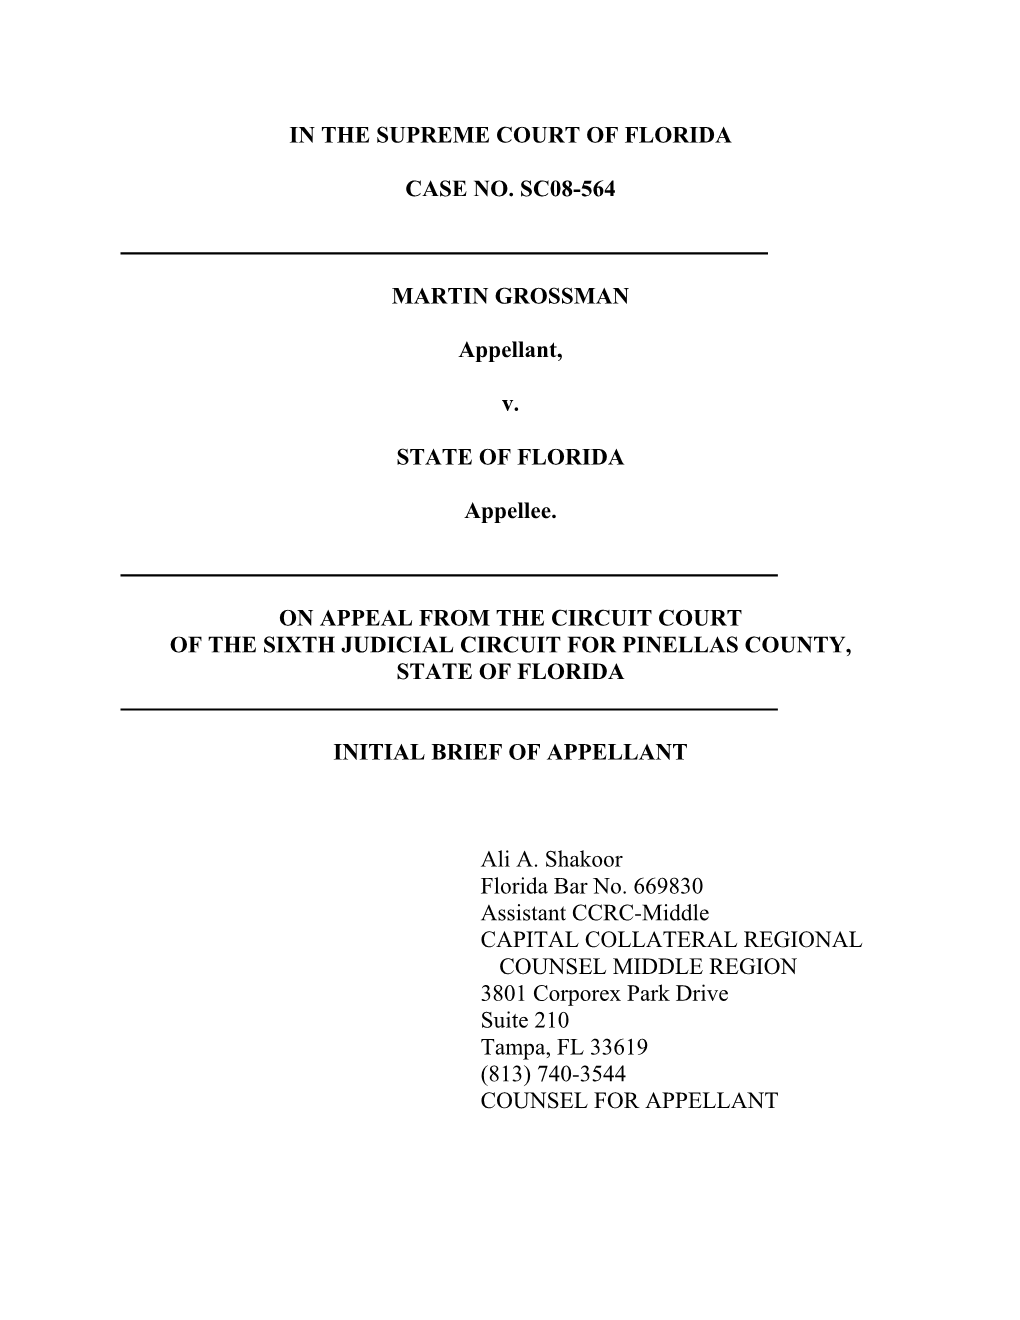 In the Supreme Court of Florida Case No. Sc08-564